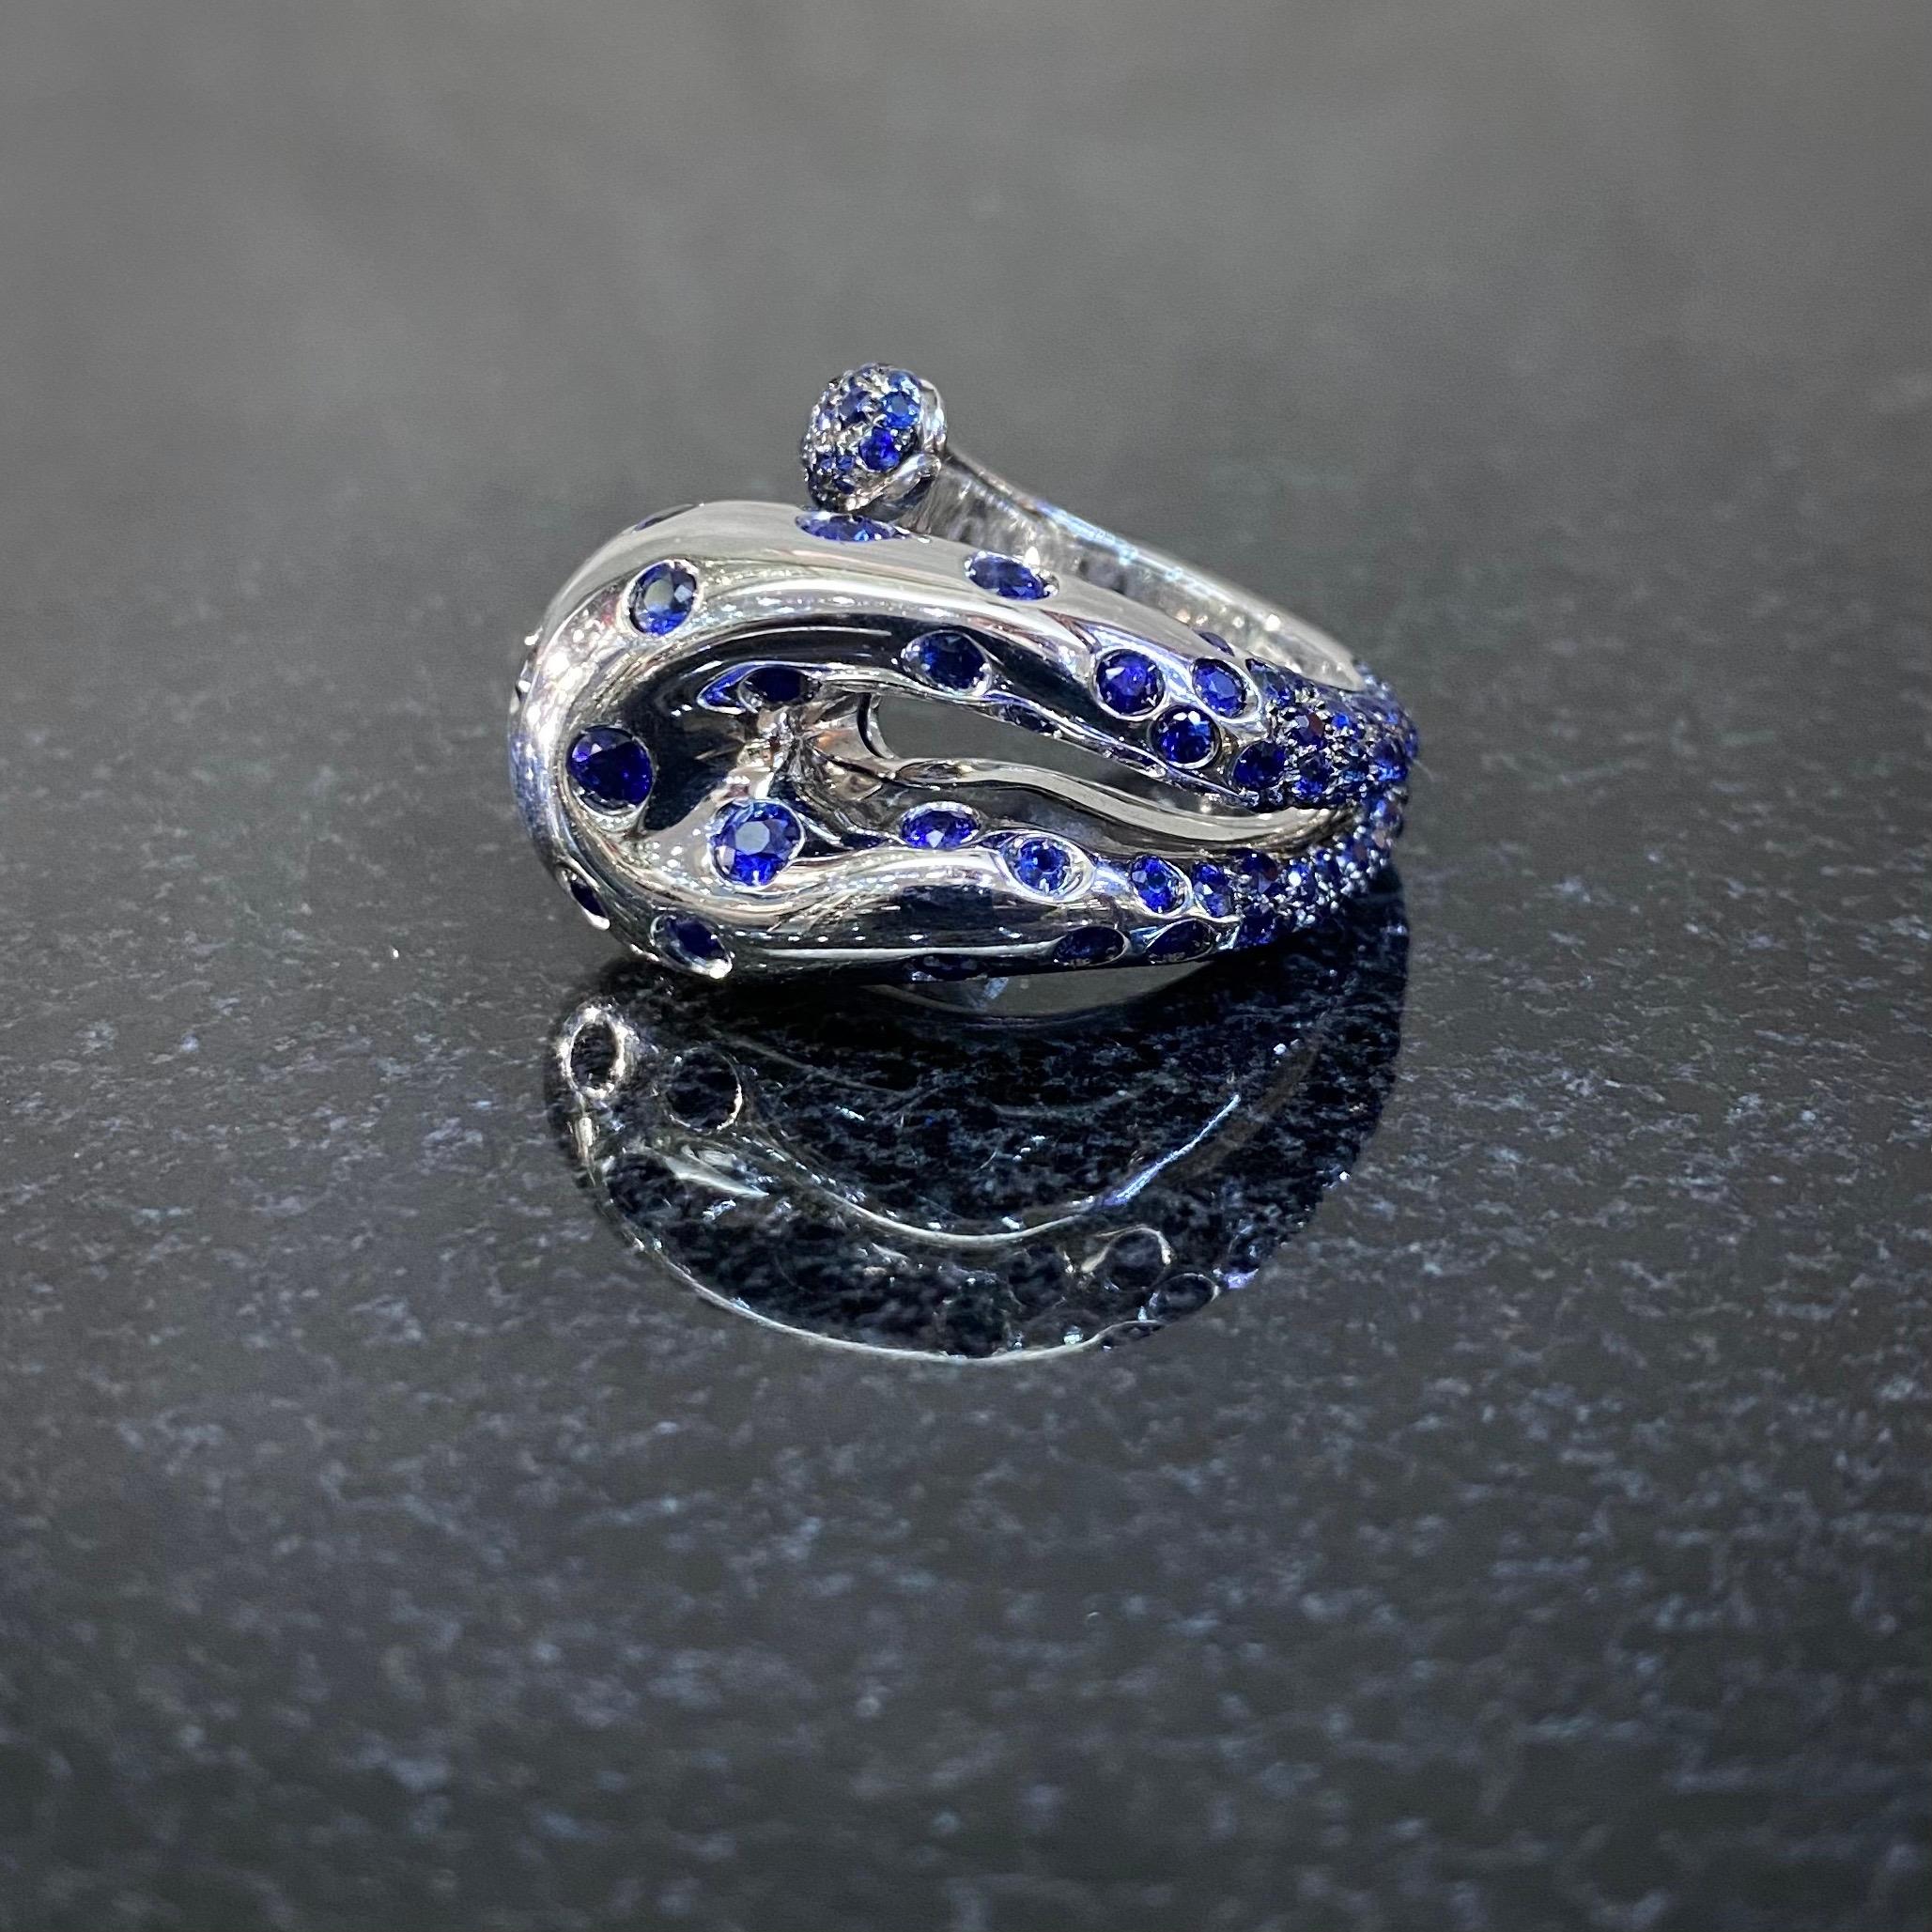 de GRISOGONO blue sapphire serpent openwork cocktail ring in 18kt white gold, circa 2000. Designed in the shape of an abstract openwork snake coiled around the finger, this ring’s domed head is flush-set throughout with circular-cut royal blue